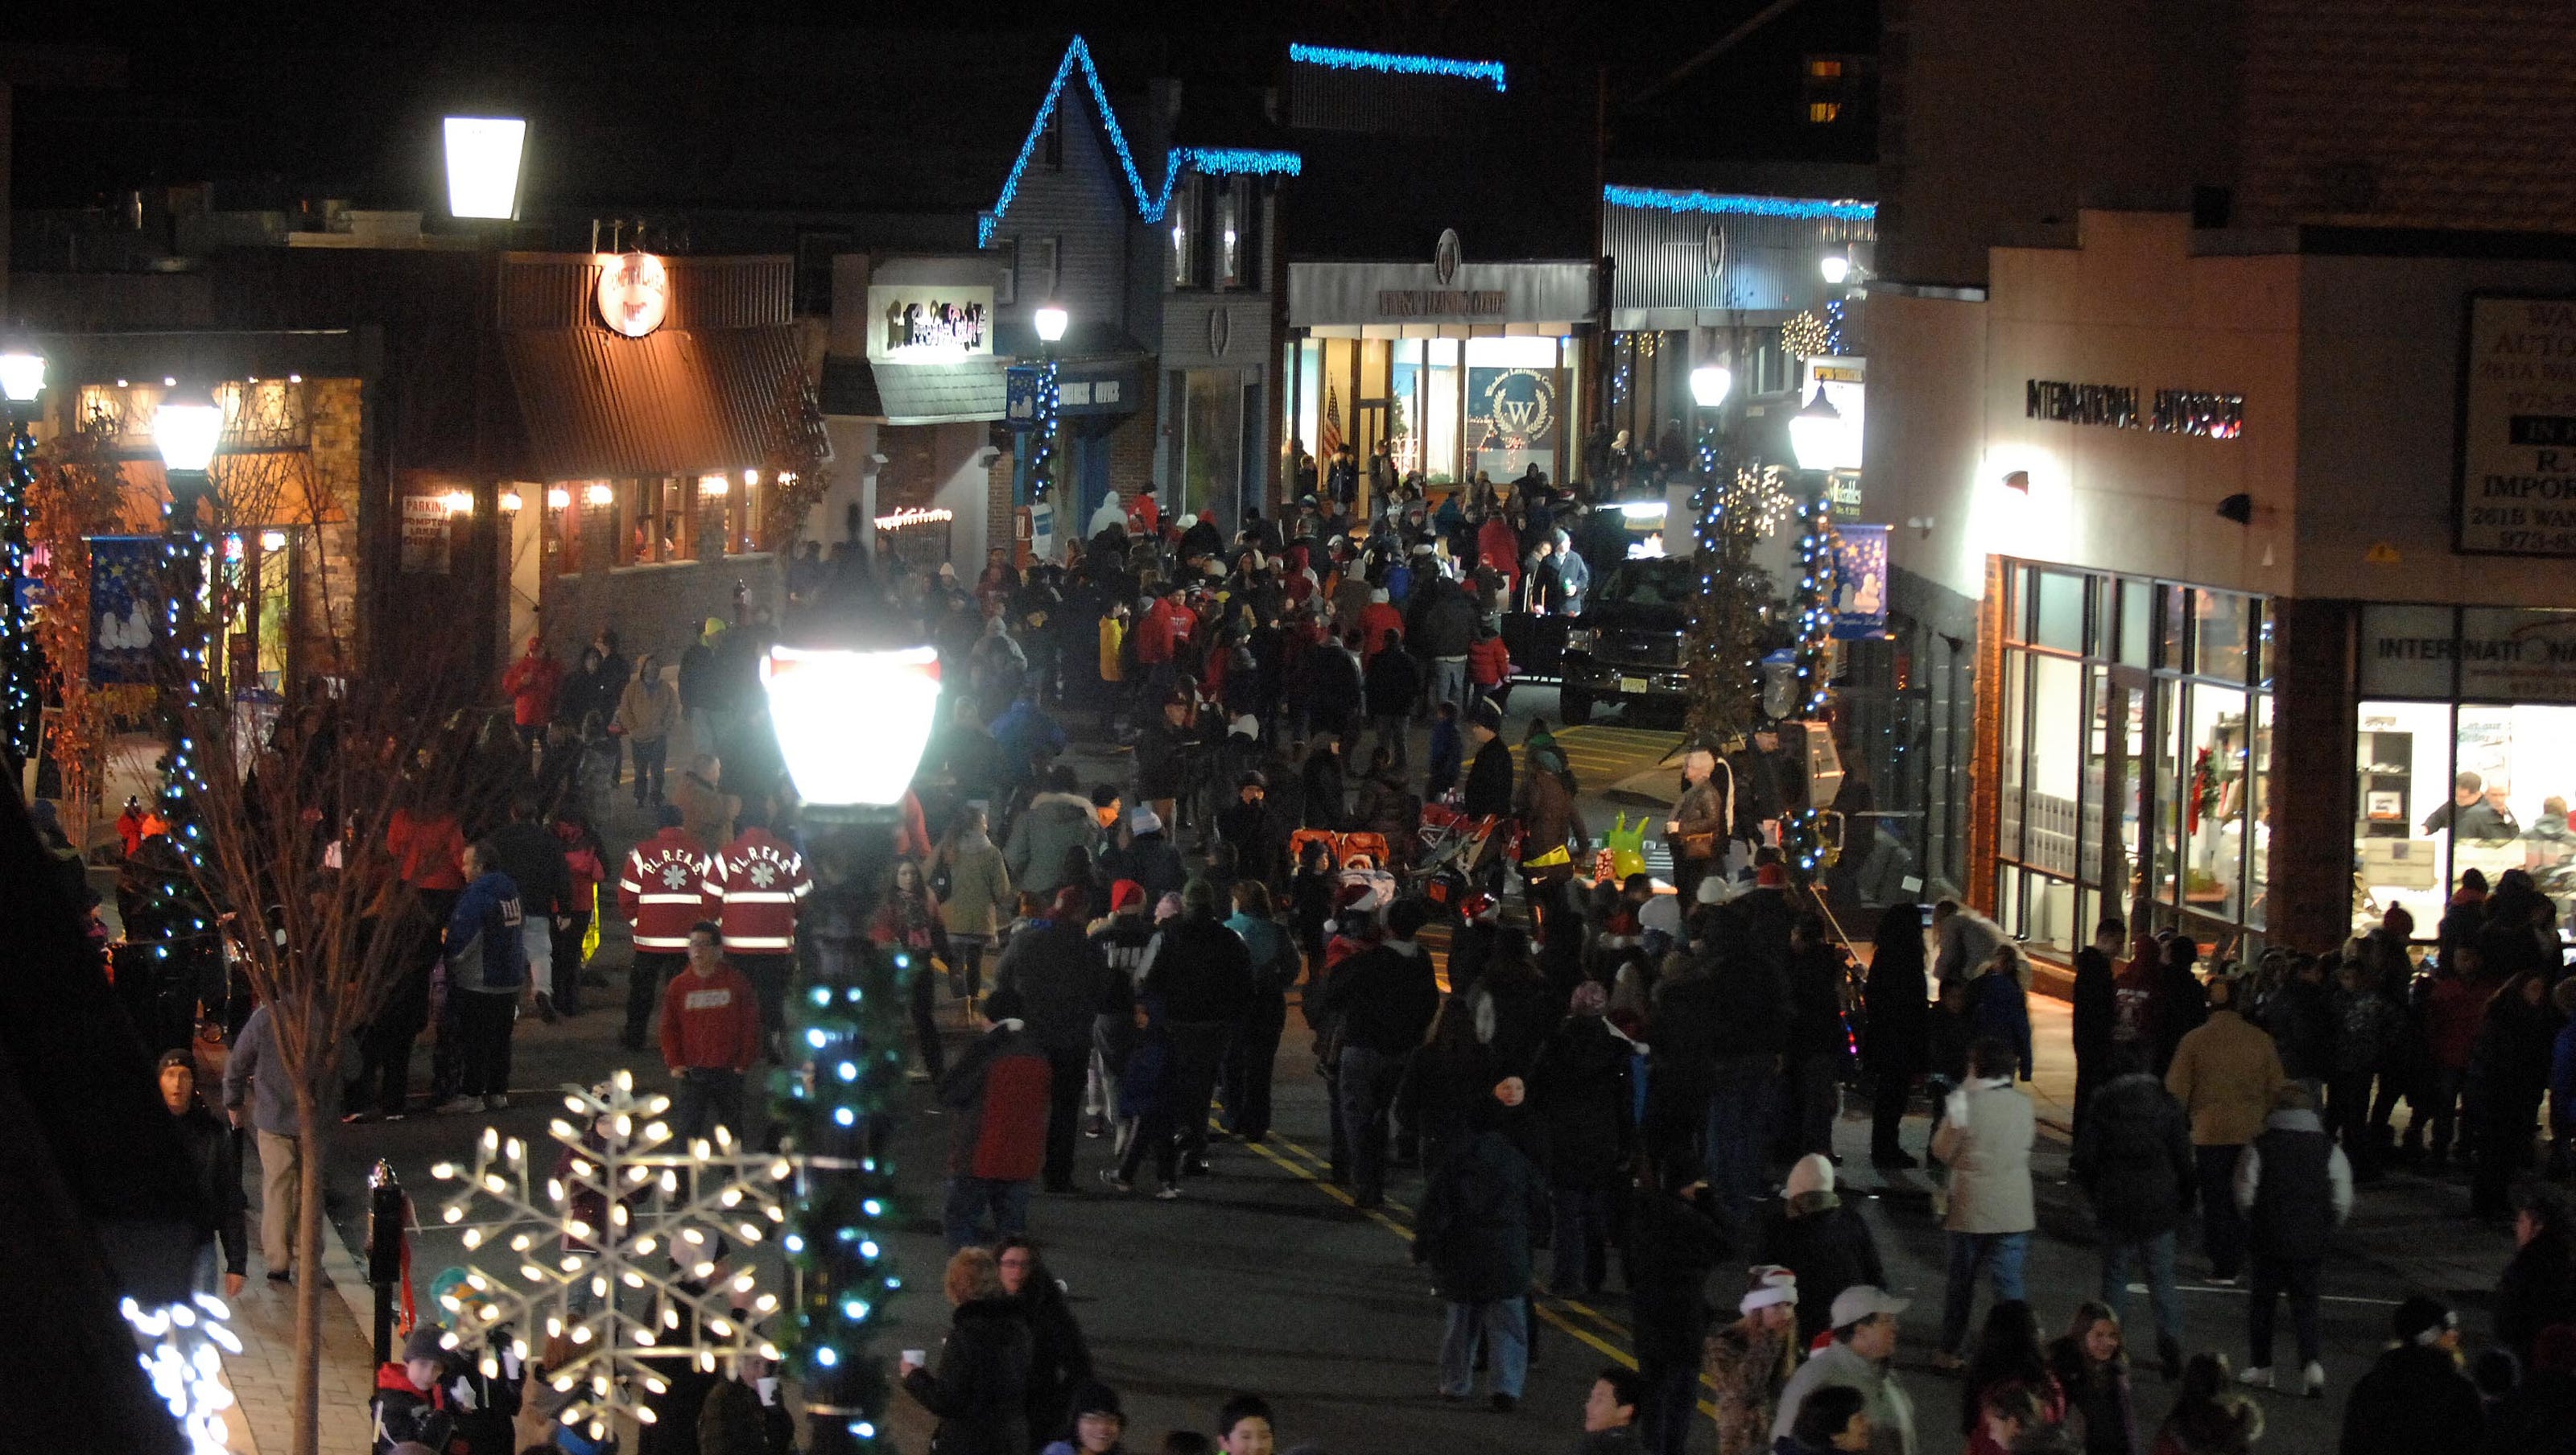 Pompton Lakes plans oldfashioned holiday stroll